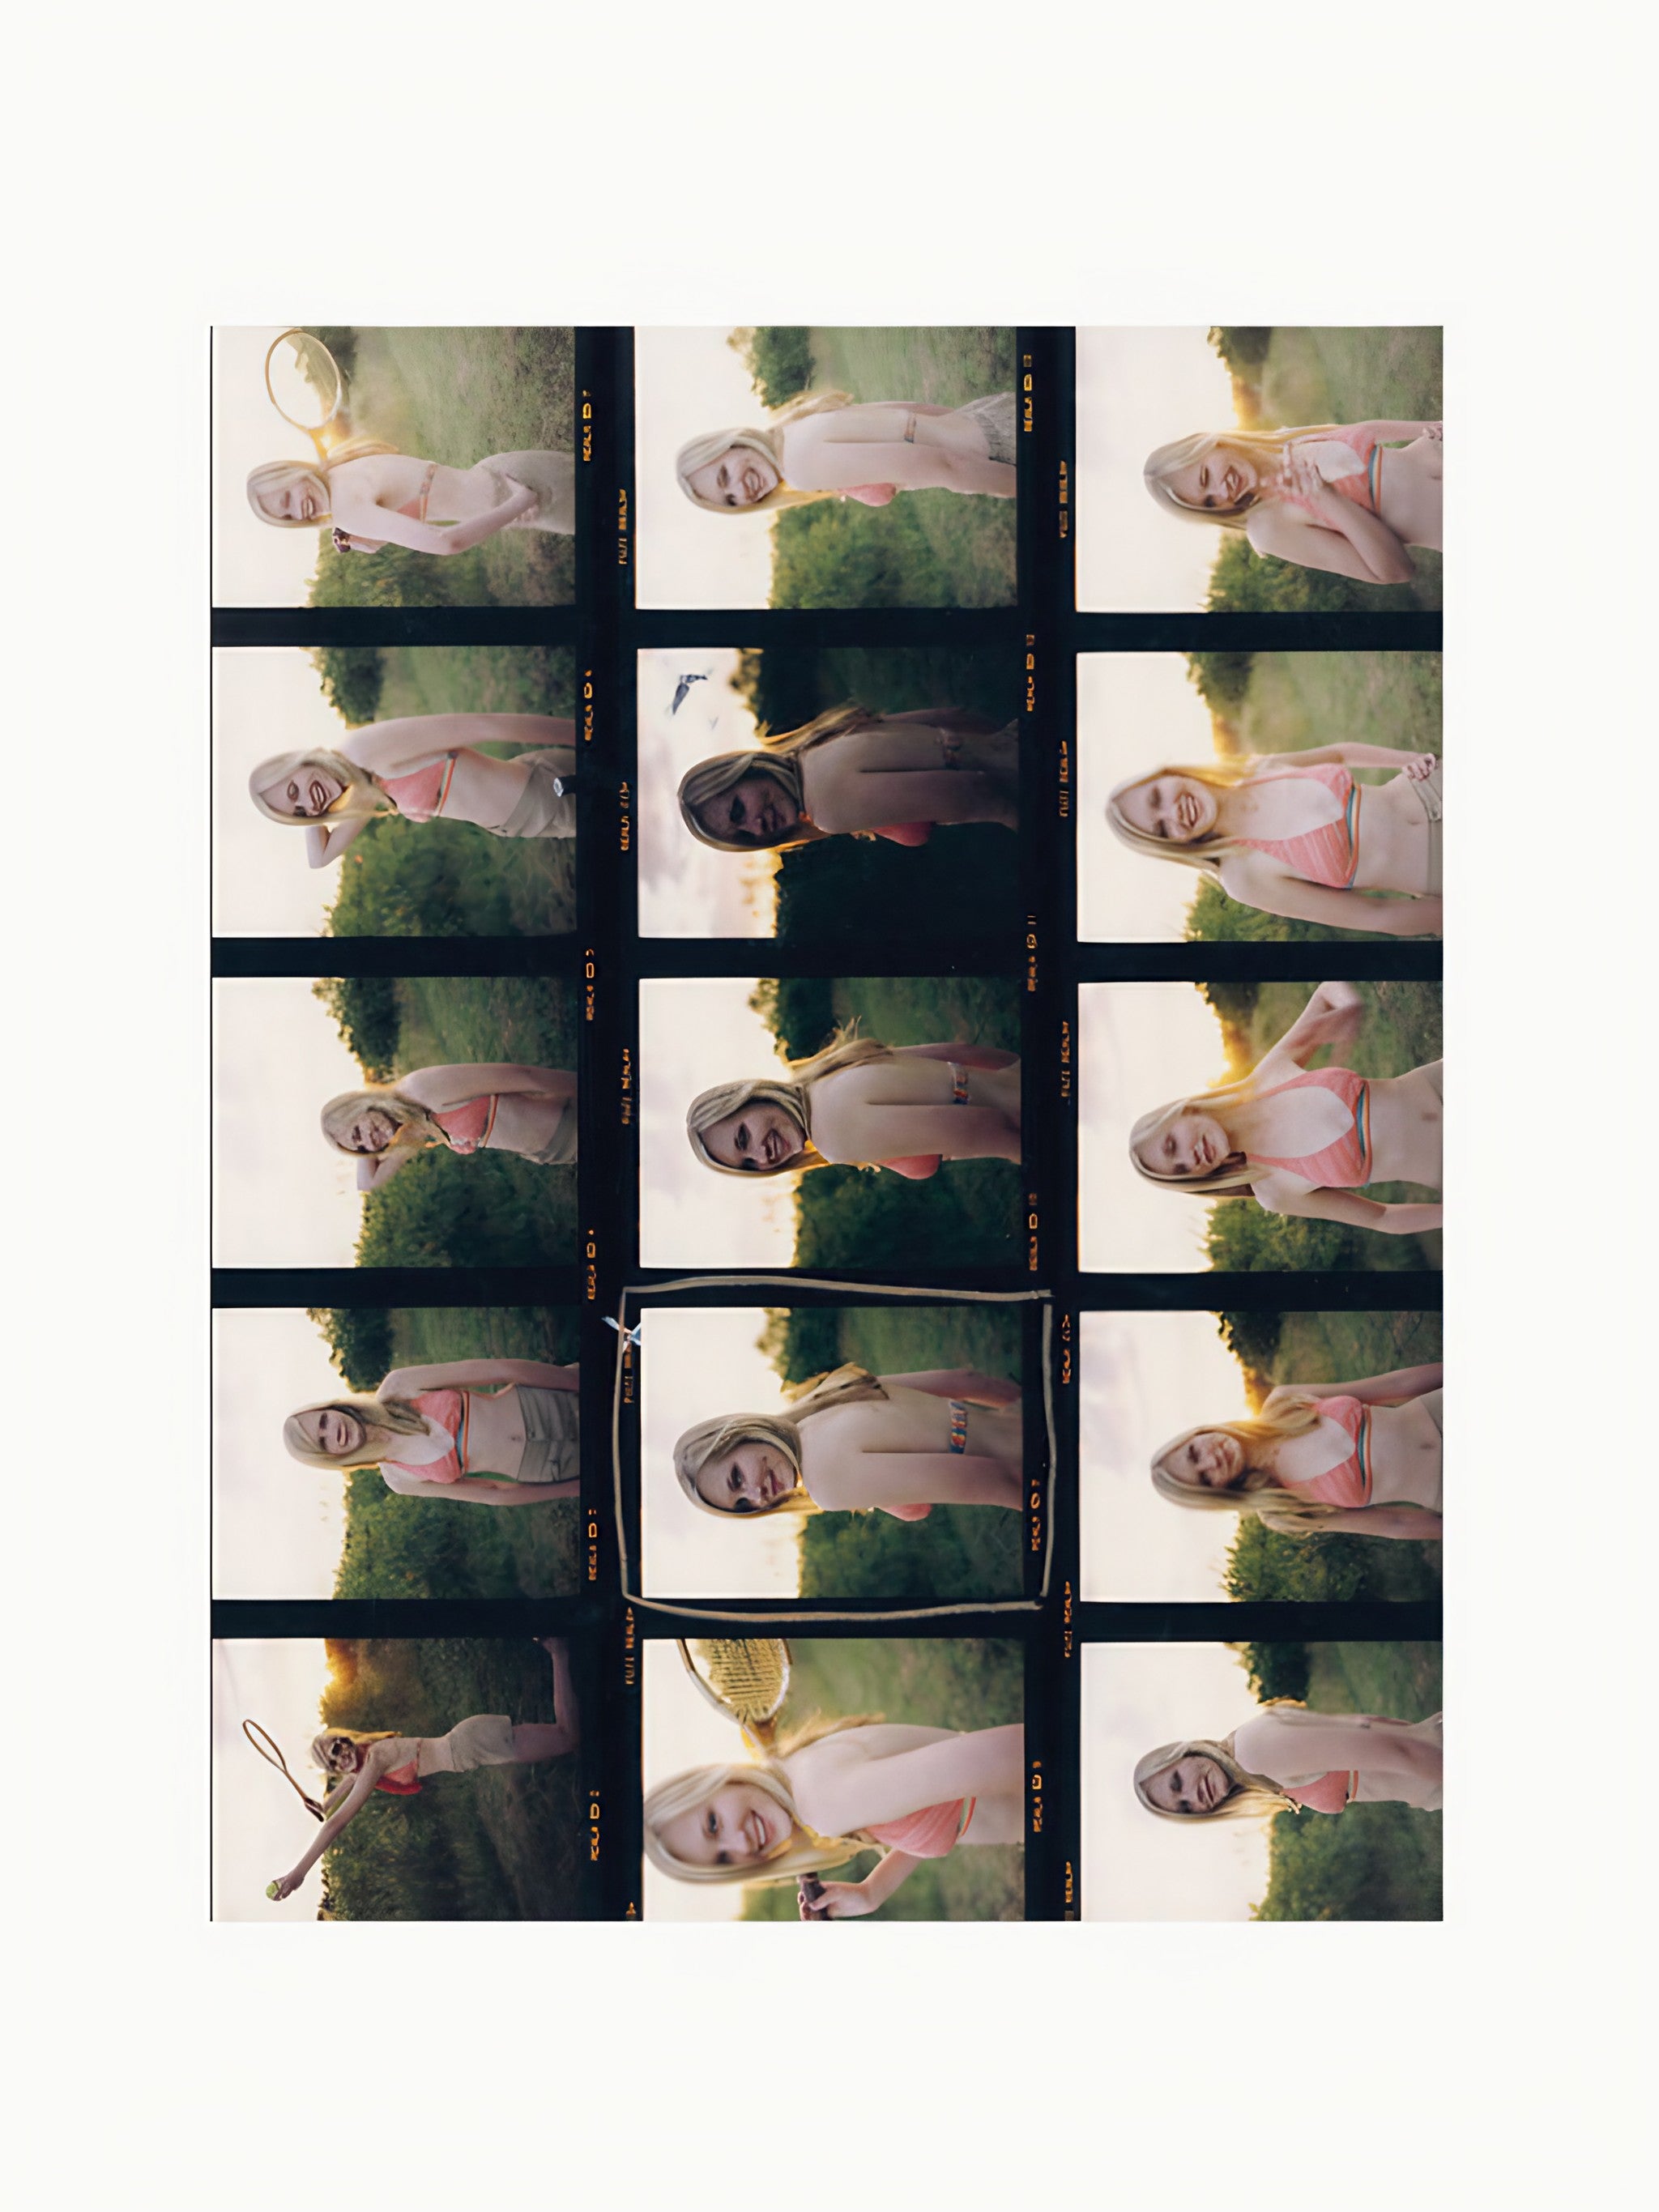 A Archive Sofia Coppola film strip featuring multiple frames of a woman in a pink dress and sunhat, posed in a grassy field during golden hour, interacting with bubbles. Some frames capture her smiling or looking whimsically.